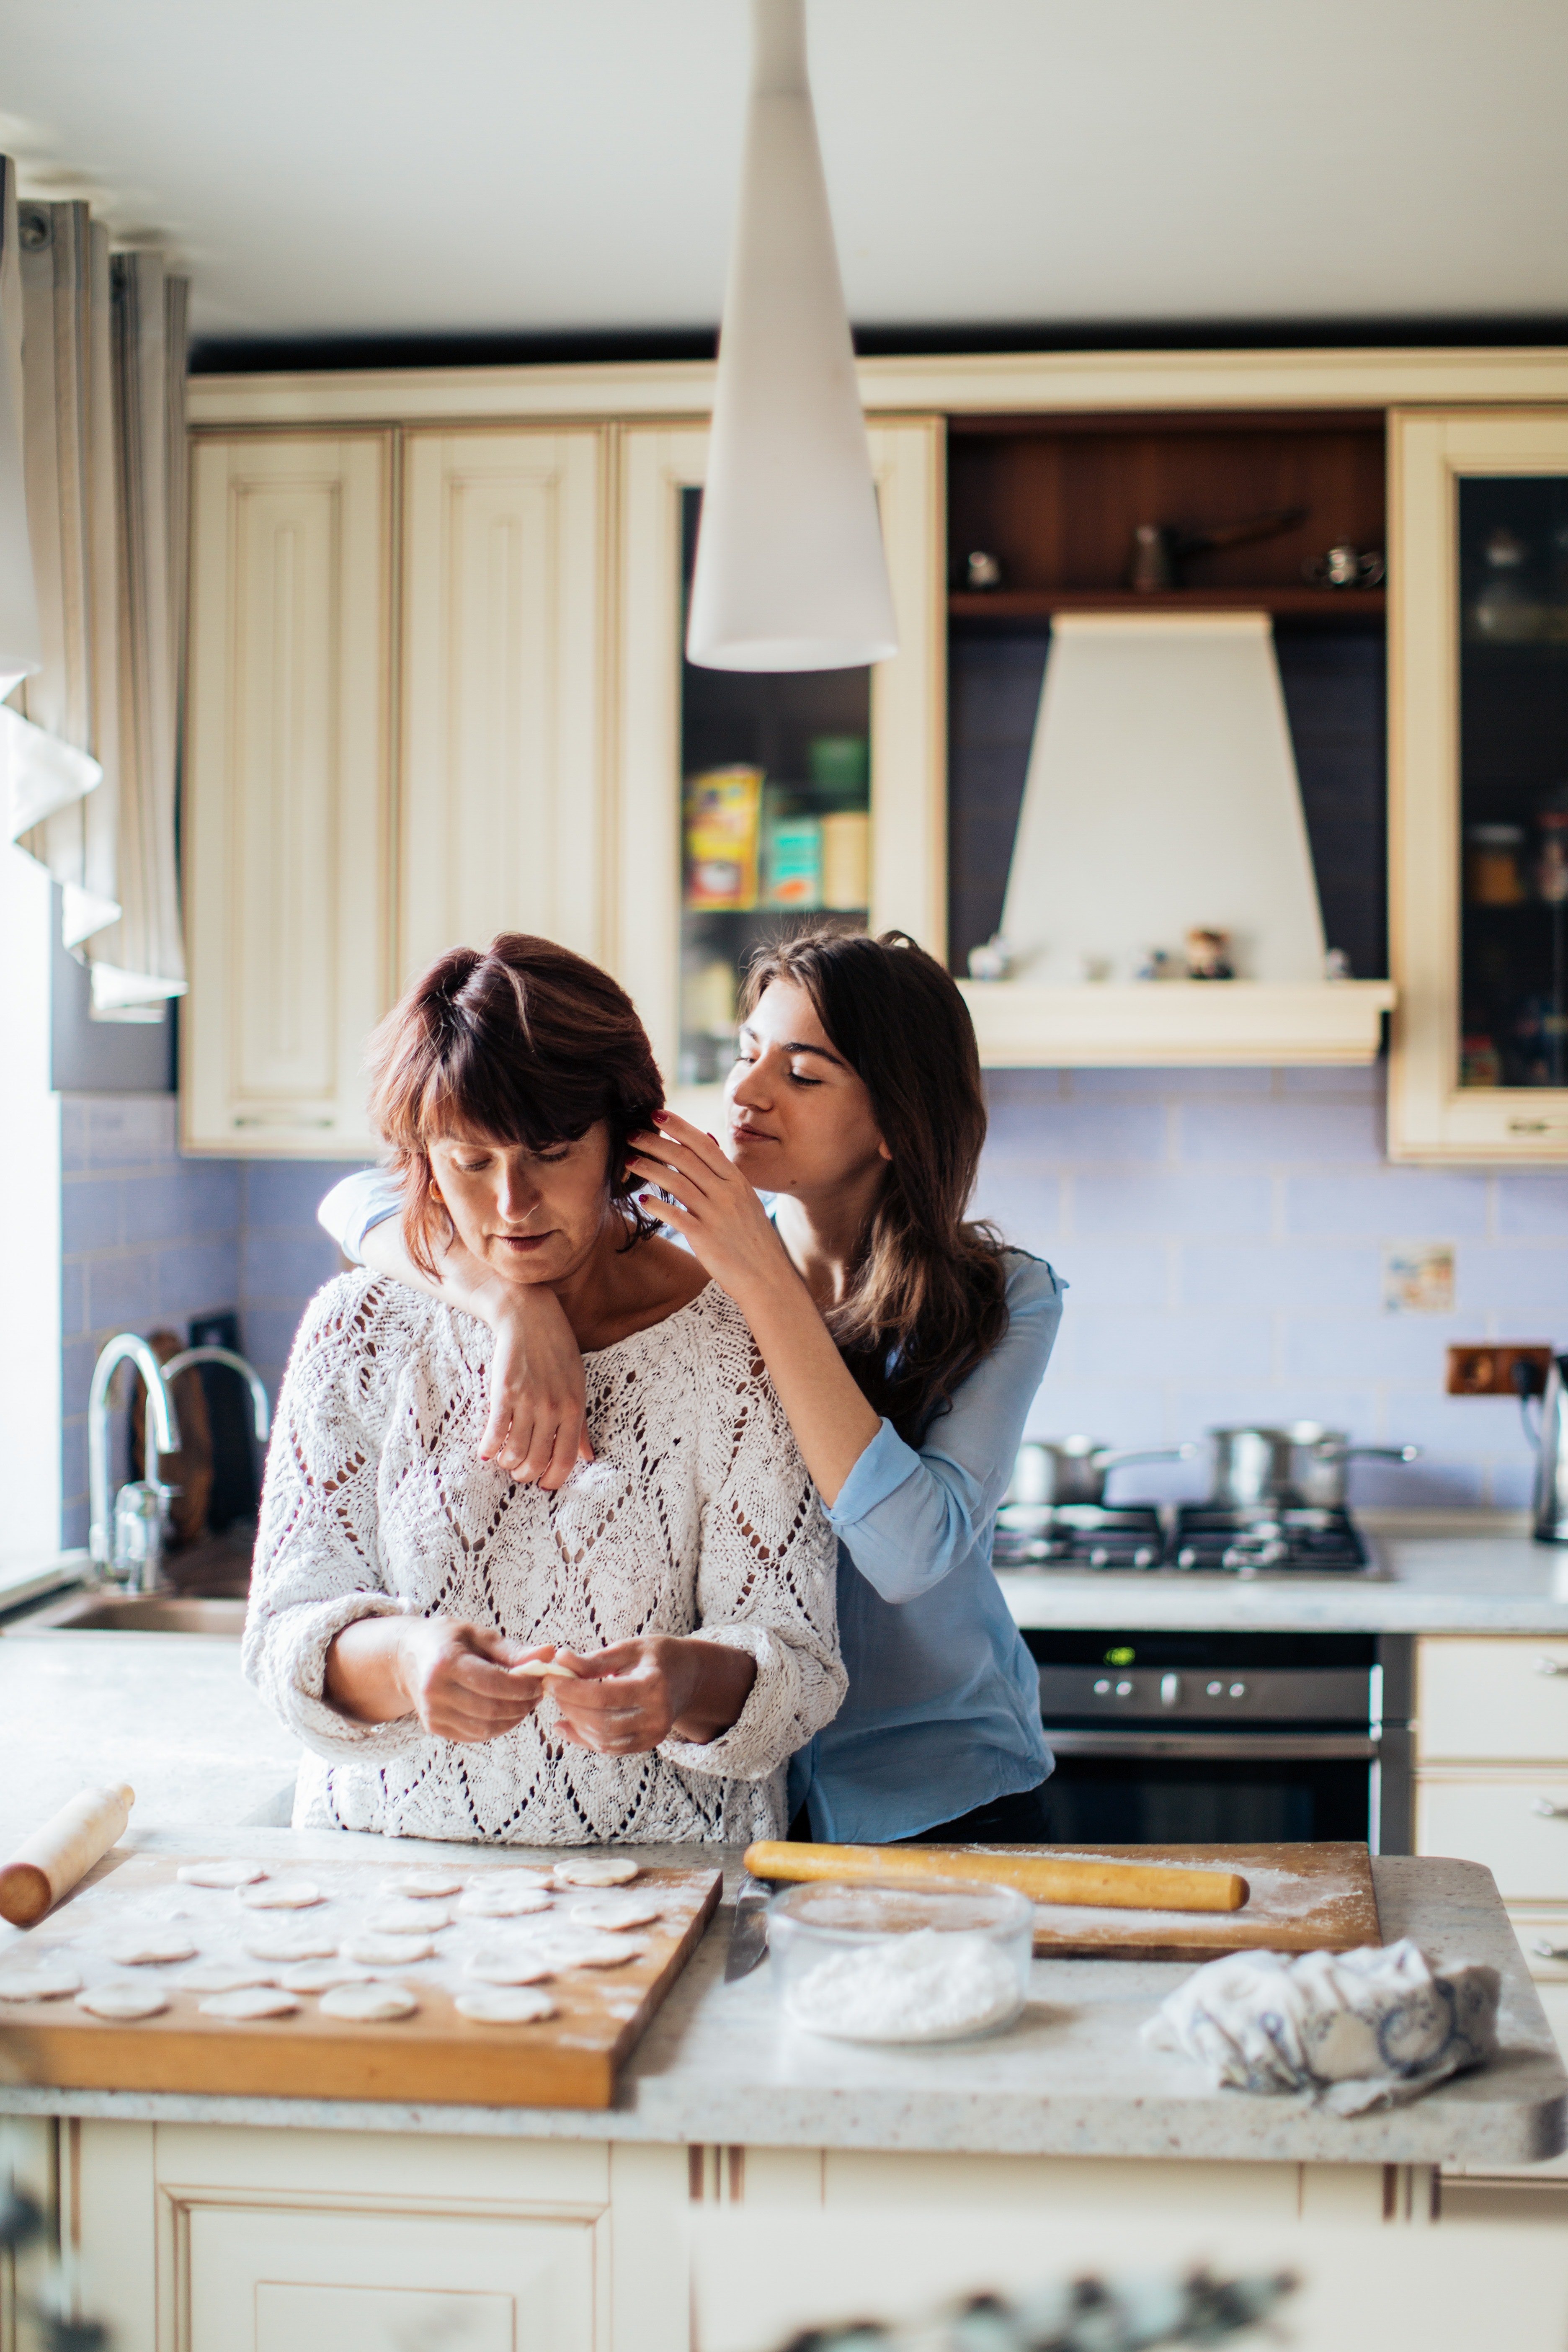 Martha returned home to Linda around that period after graduating, and they became each other's support as they grieved | Source: Pexels